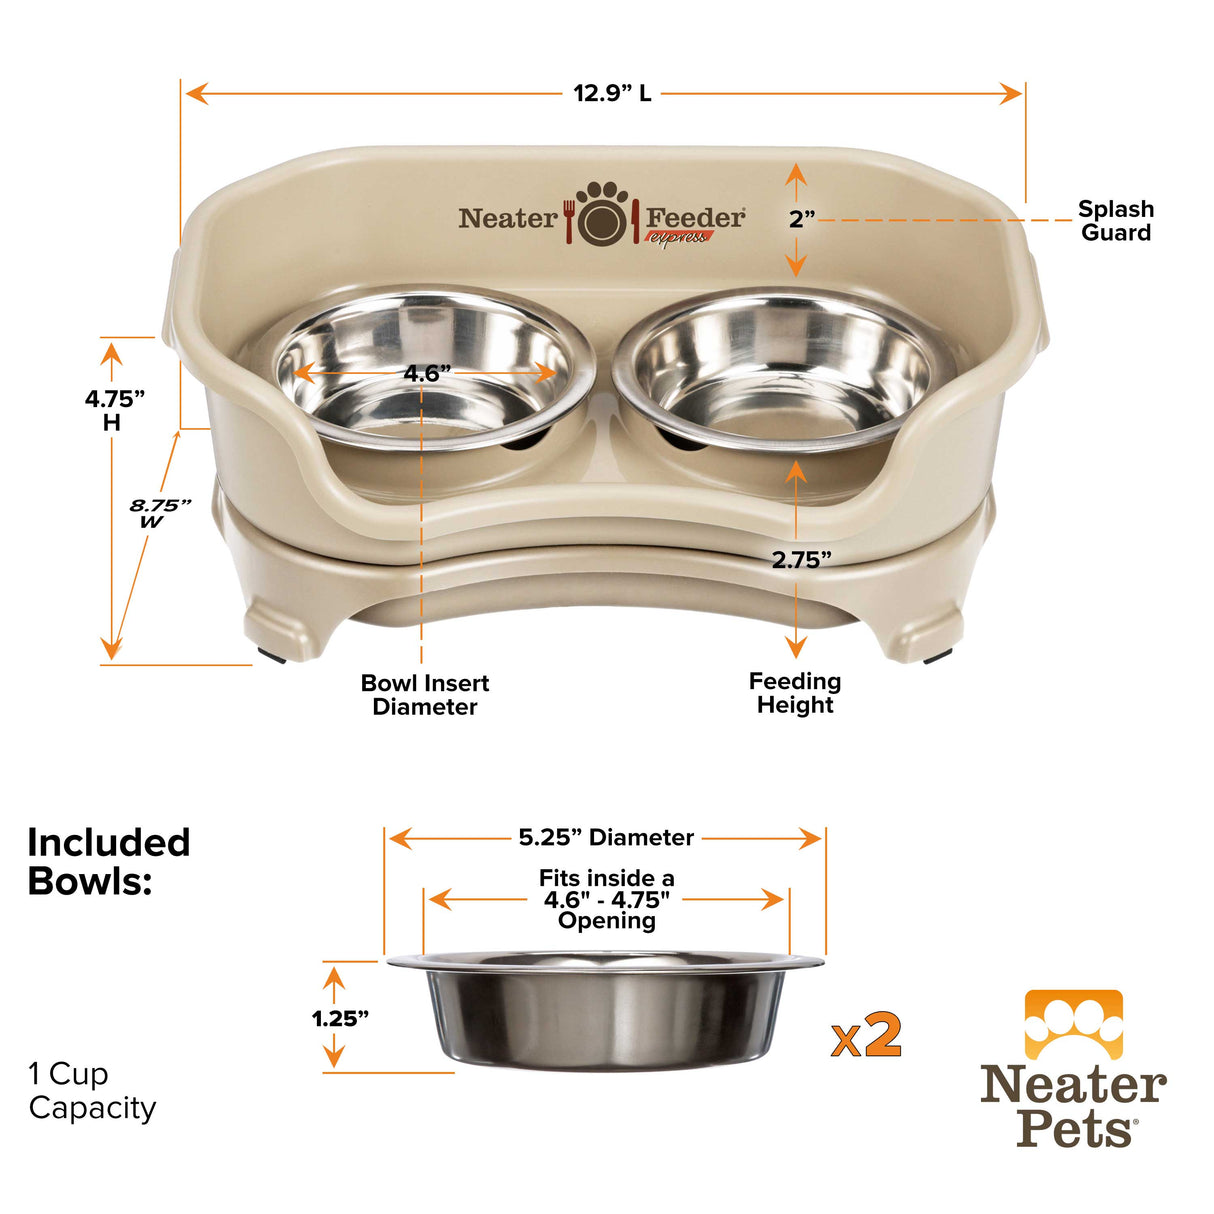 Dimensions of the Almond Express Cat Neater Feeder